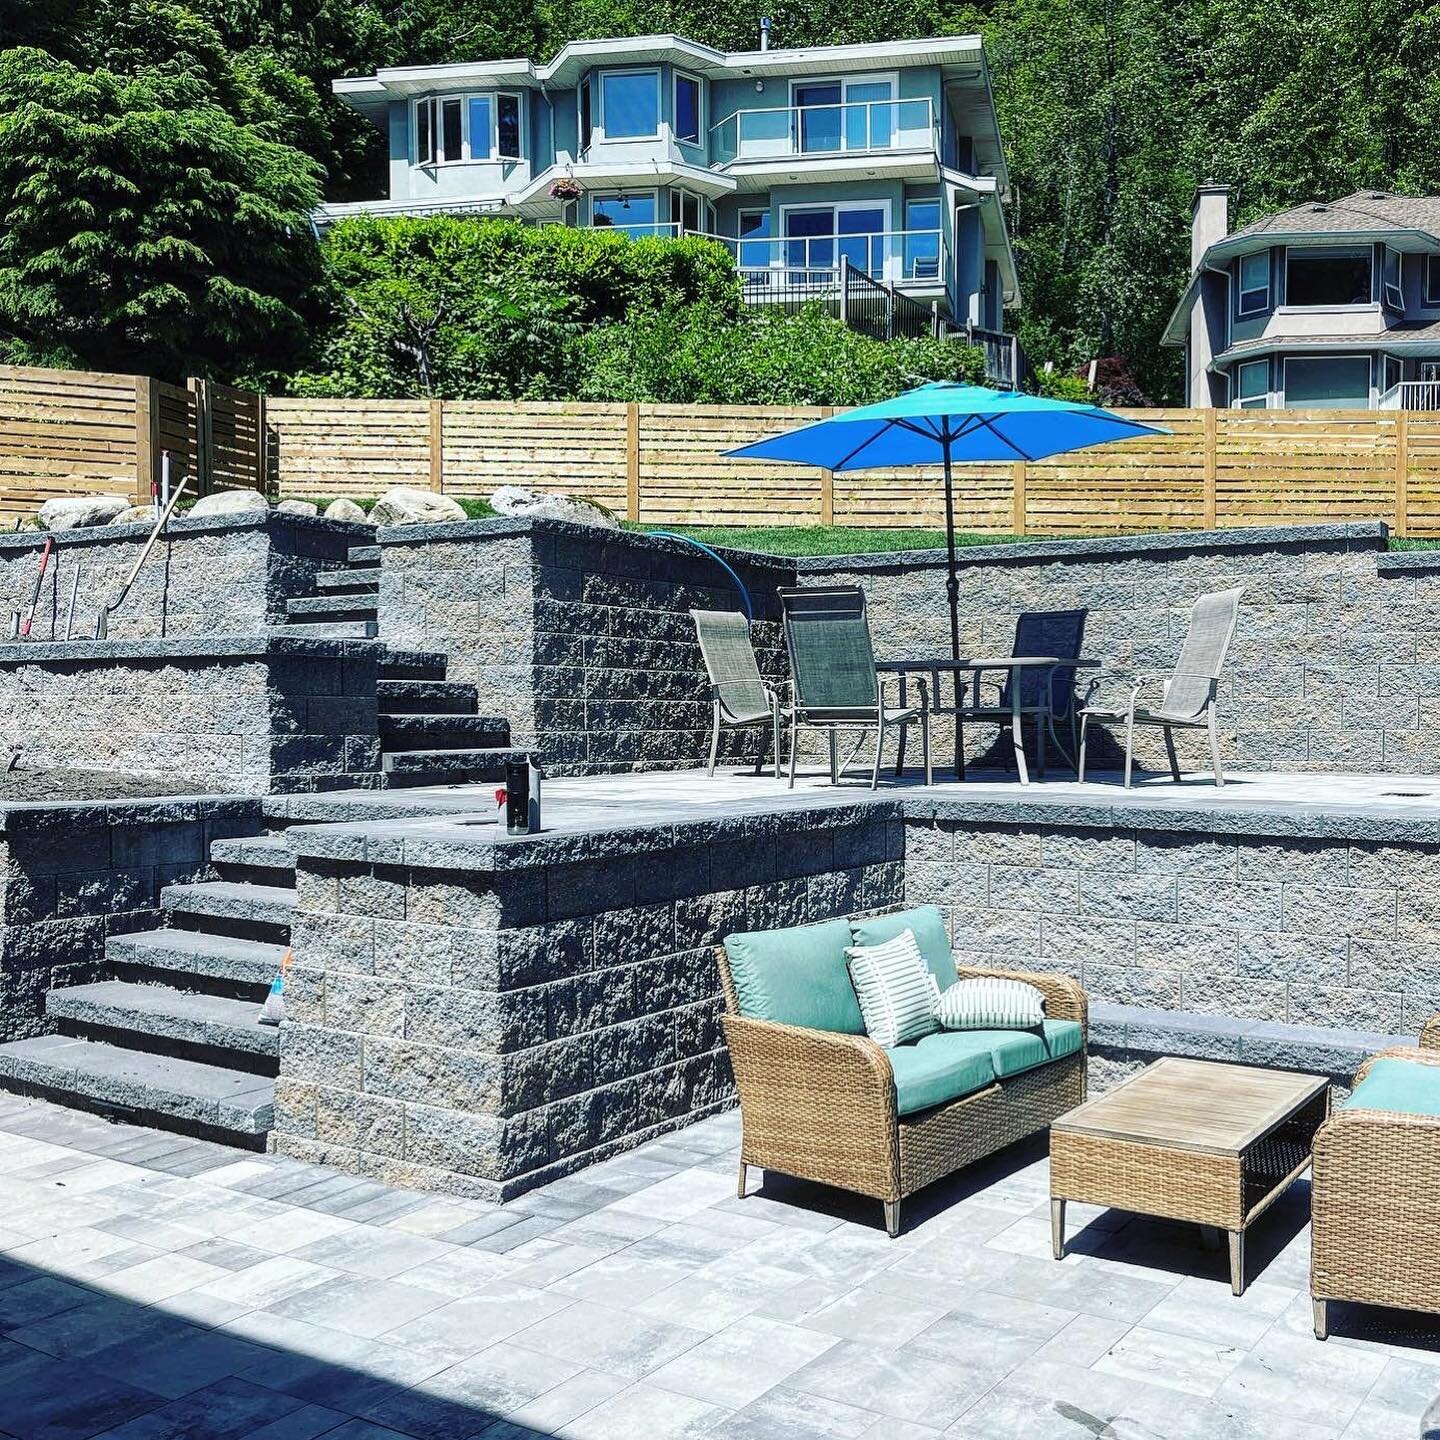 We are North Shore&rsquo;s hardscape kings! Our bread and butter. Large outdoor living areas. Multi-tiered retaining walls and patios. You name it, we can deliver. #mountainscape #hardscape #howtohardscape #pavingstones #retainingwalls #basalite #bel